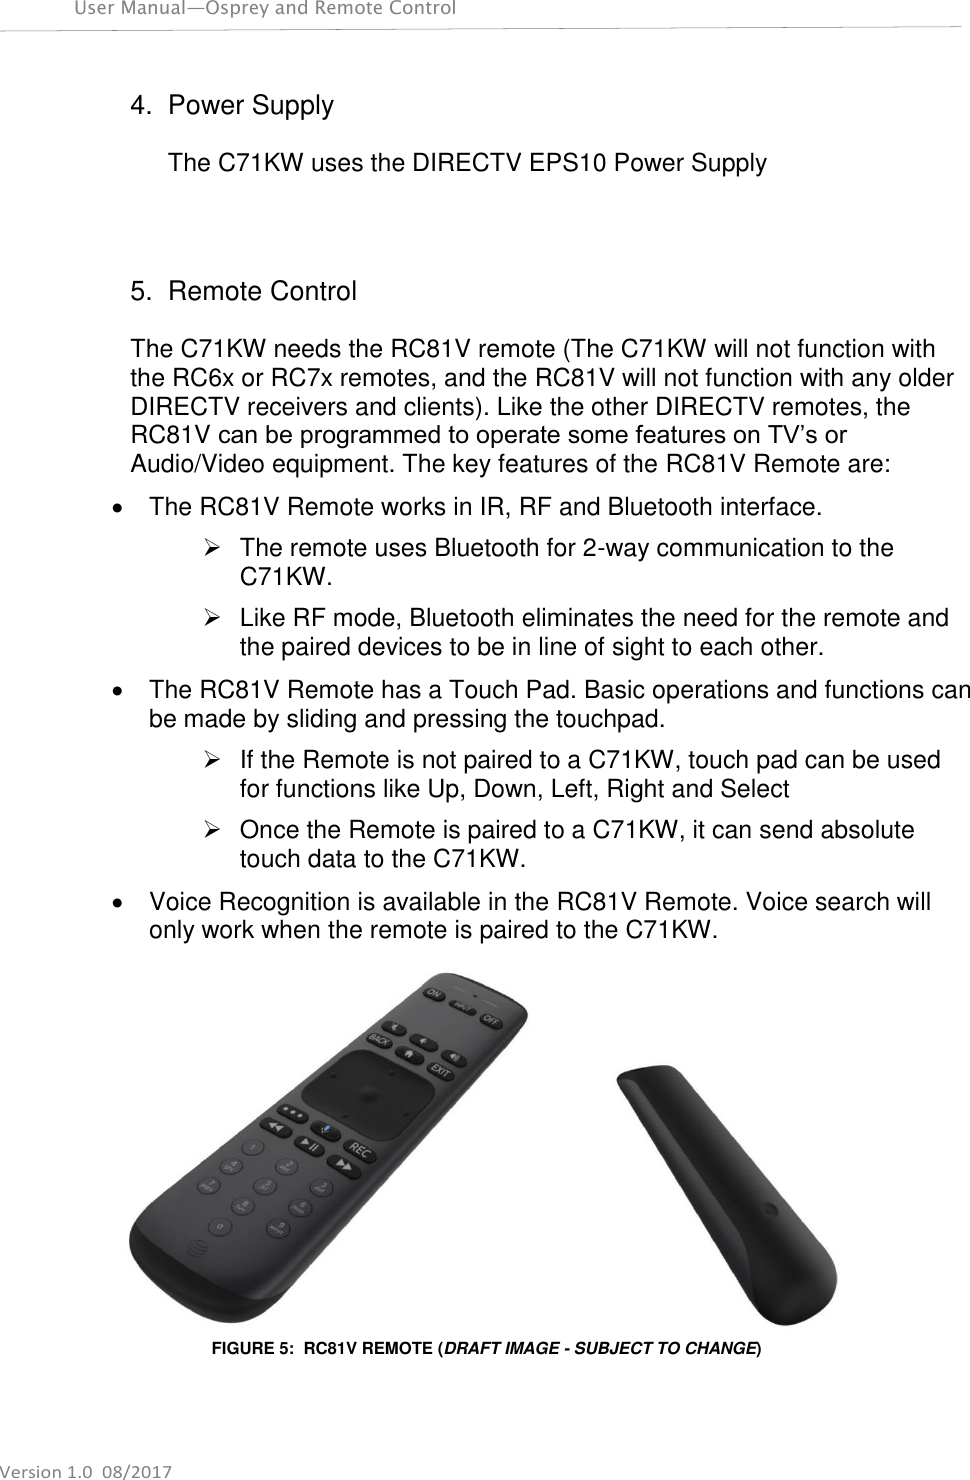 User Manual—Osprey and Remote Control    Version 1.0  08/2017 4.  Power Supply  The C71KW uses the DIRECTV EPS10 Power Supply    5.  Remote Control  The C71KW needs the RC81V remote (The C71KW will not function with the RC6x or RC7x remotes, and the RC81V will not function with any older DIRECTV receivers and clients). Like the other DIRECTV remotes, the RC81V can be programmed to operate some features on TV’s or Audio/Video equipment. The key features of the RC81V Remote are:   The RC81V Remote works in IR, RF and Bluetooth interface.    The remote uses Bluetooth for 2-way communication to the C71KW.   Like RF mode, Bluetooth eliminates the need for the remote and the paired devices to be in line of sight to each other.   The RC81V Remote has a Touch Pad. Basic operations and functions can be made by sliding and pressing the touchpad.   If the Remote is not paired to a C71KW, touch pad can be used for functions like Up, Down, Left, Right and Select   Once the Remote is paired to a C71KW, it can send absolute touch data to the C71KW.   Voice Recognition is available in the RC81V Remote. Voice search will only work when the remote is paired to the C71KW.  FIGURE 5:  RC81V REMOTE (DRAFT IMAGE - SUBJECT TO CHANGE)  